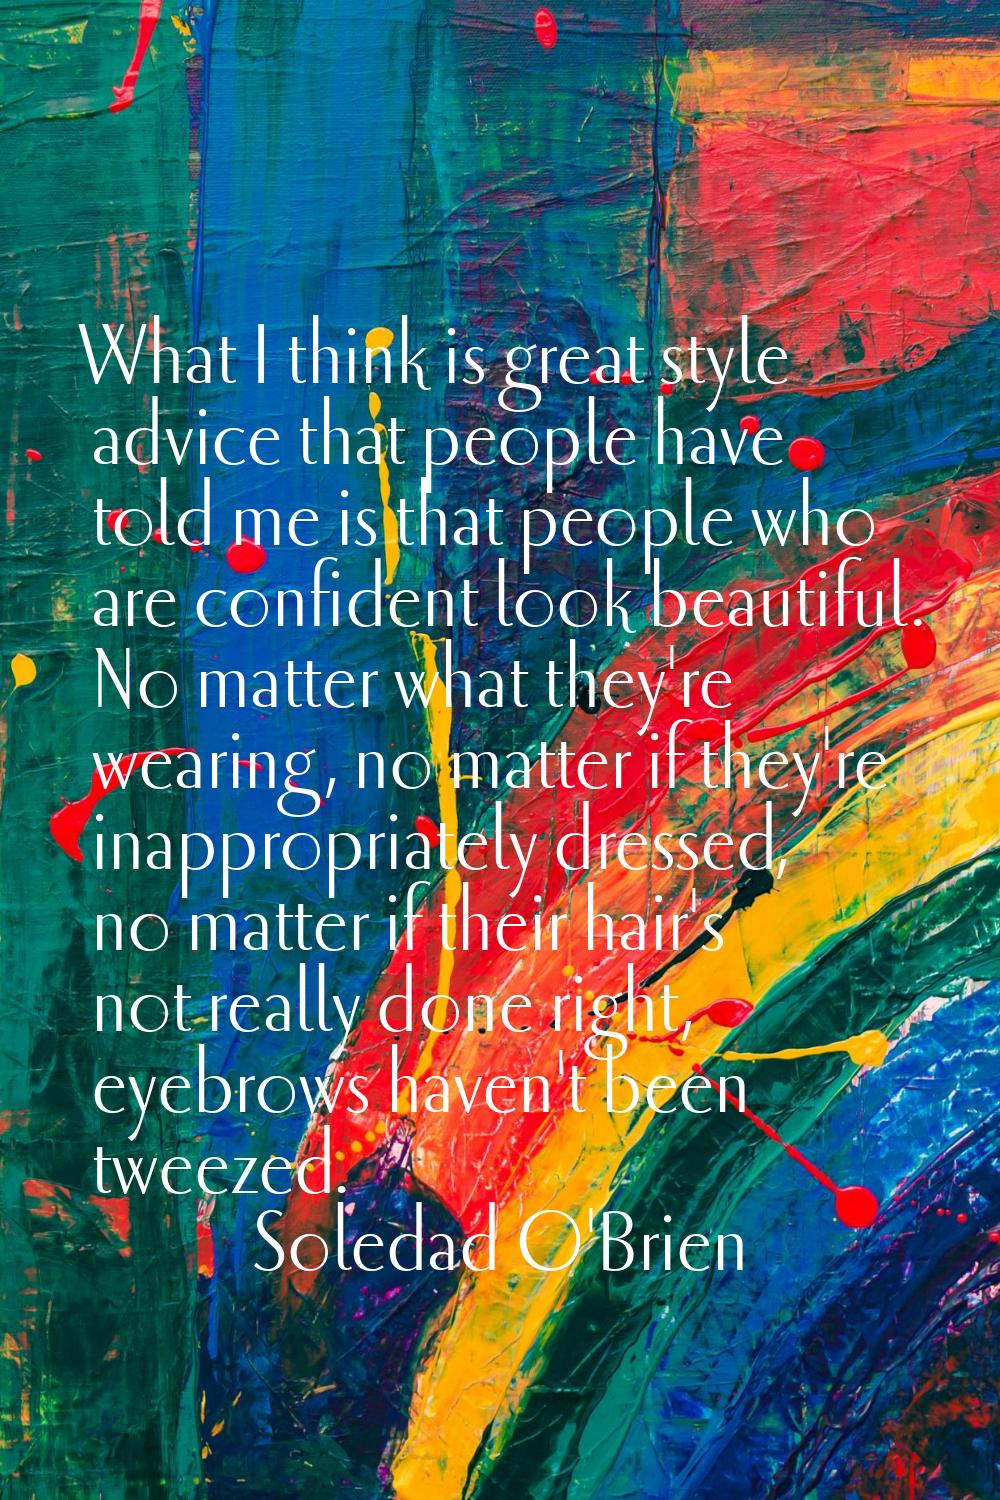 What I think is great style advice that people have told me is that people who are confident look b